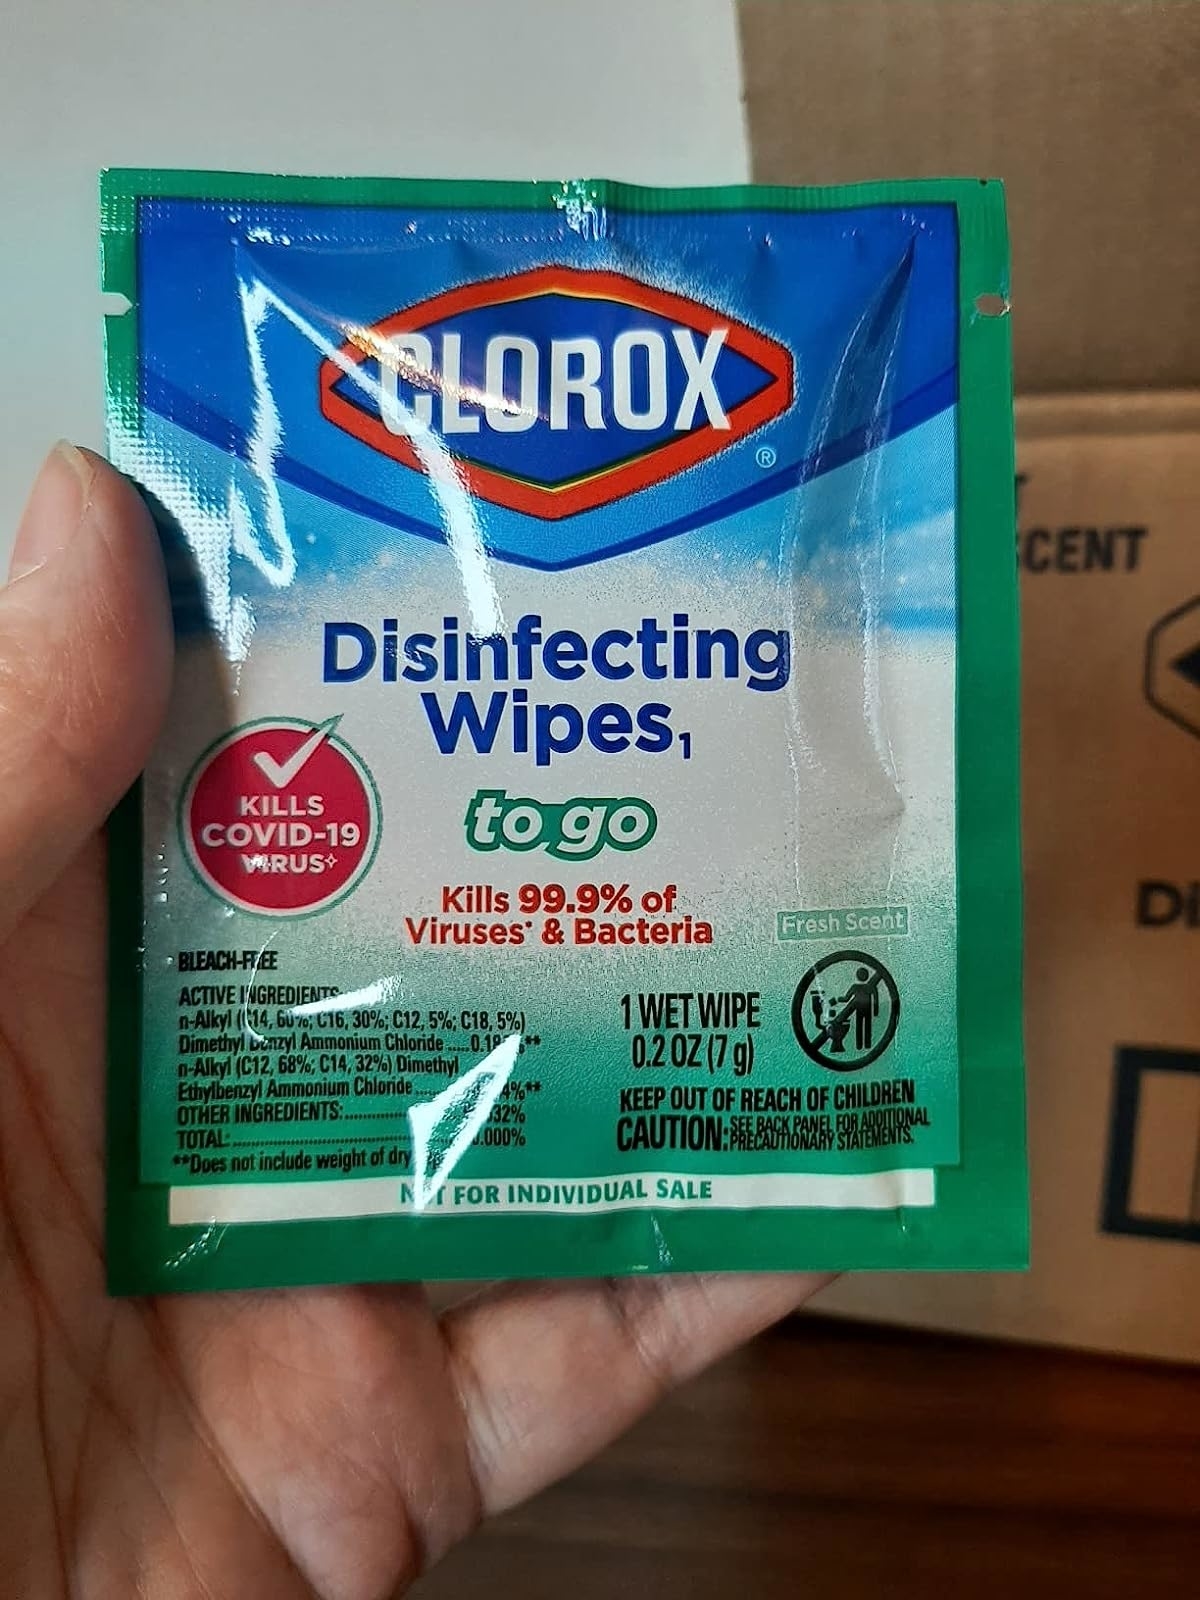 Reviewer&#x27;s photo of their hand holding the wrapped Clorox wipe